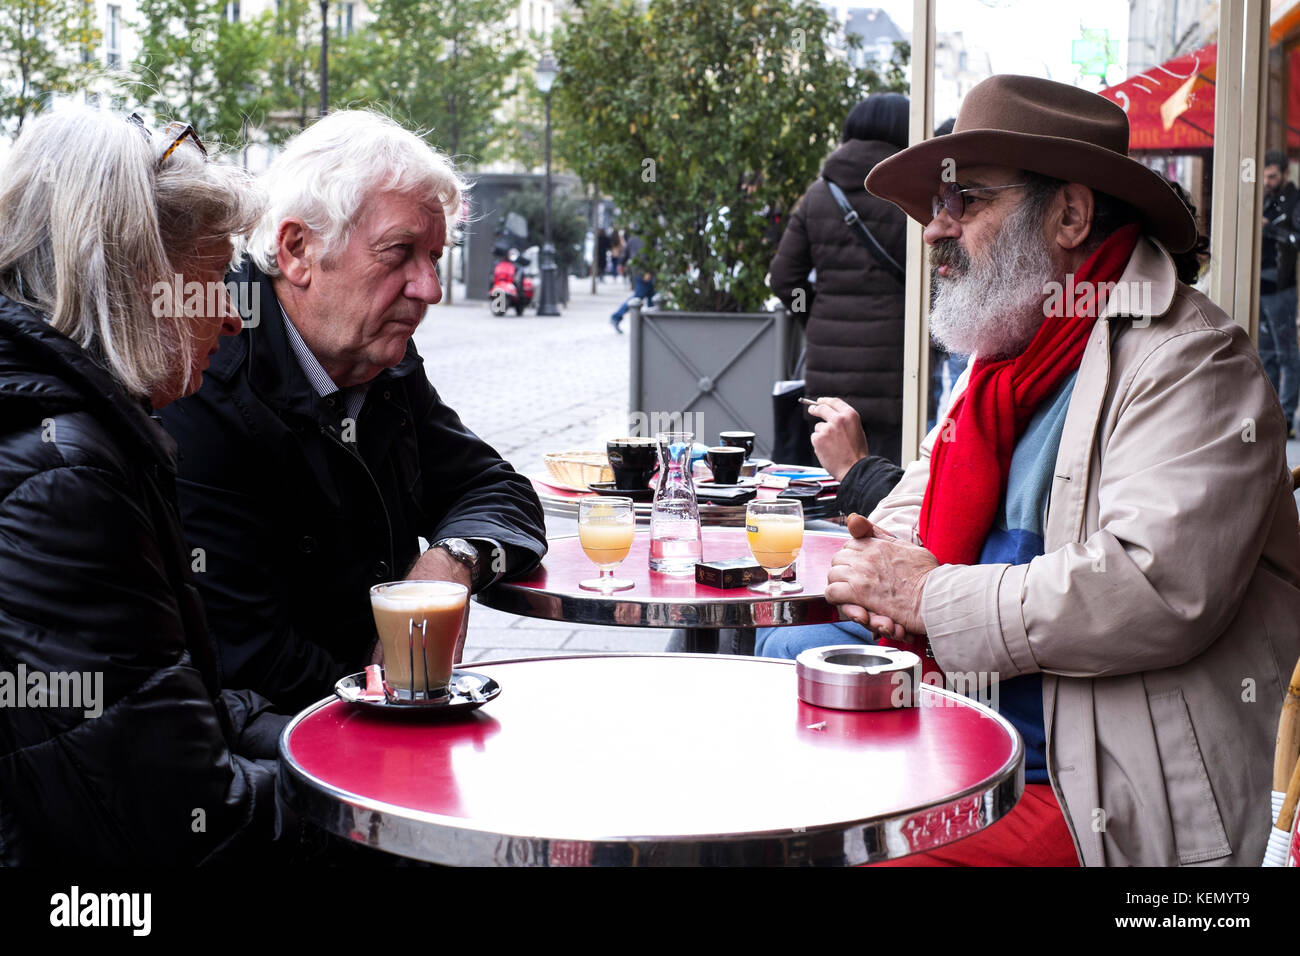 Two elderly men and a woman at a café in Paris Stock Photo